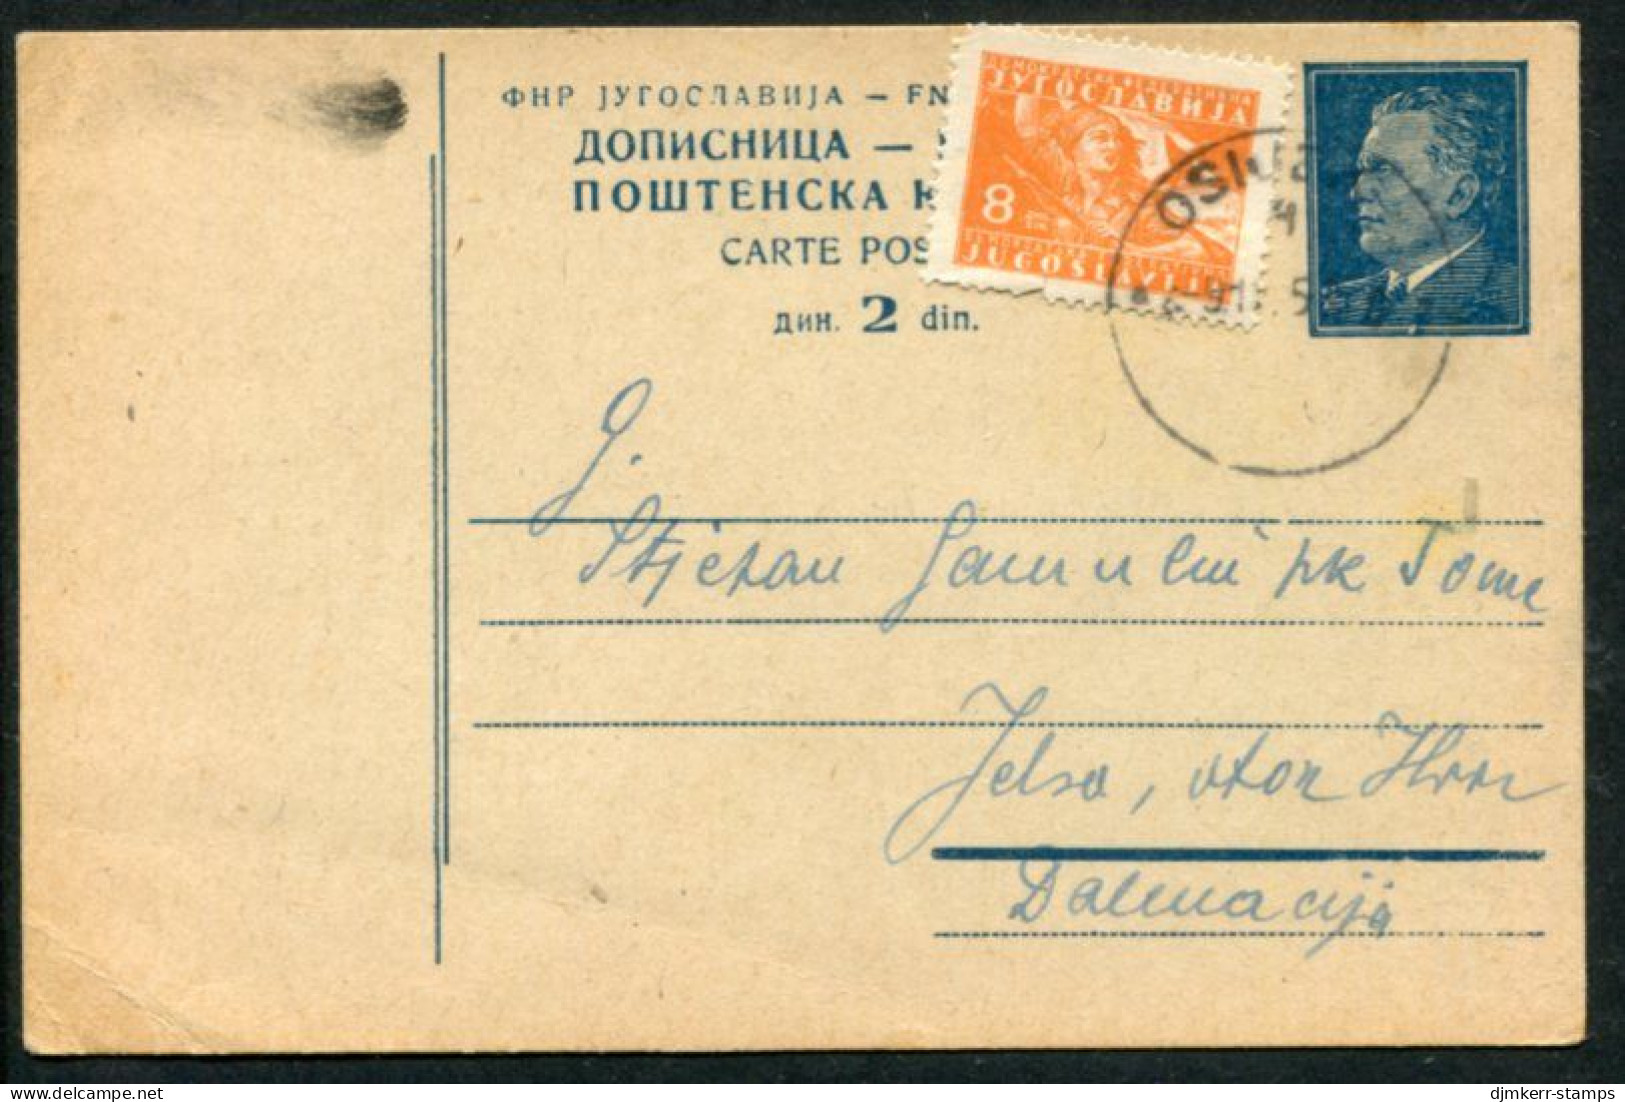 YUGOSLAVIA 1949 Tito 2 (d) Postal Stationery Card, Used With Additional Stamp.  Michel P129 - Entiers Postaux